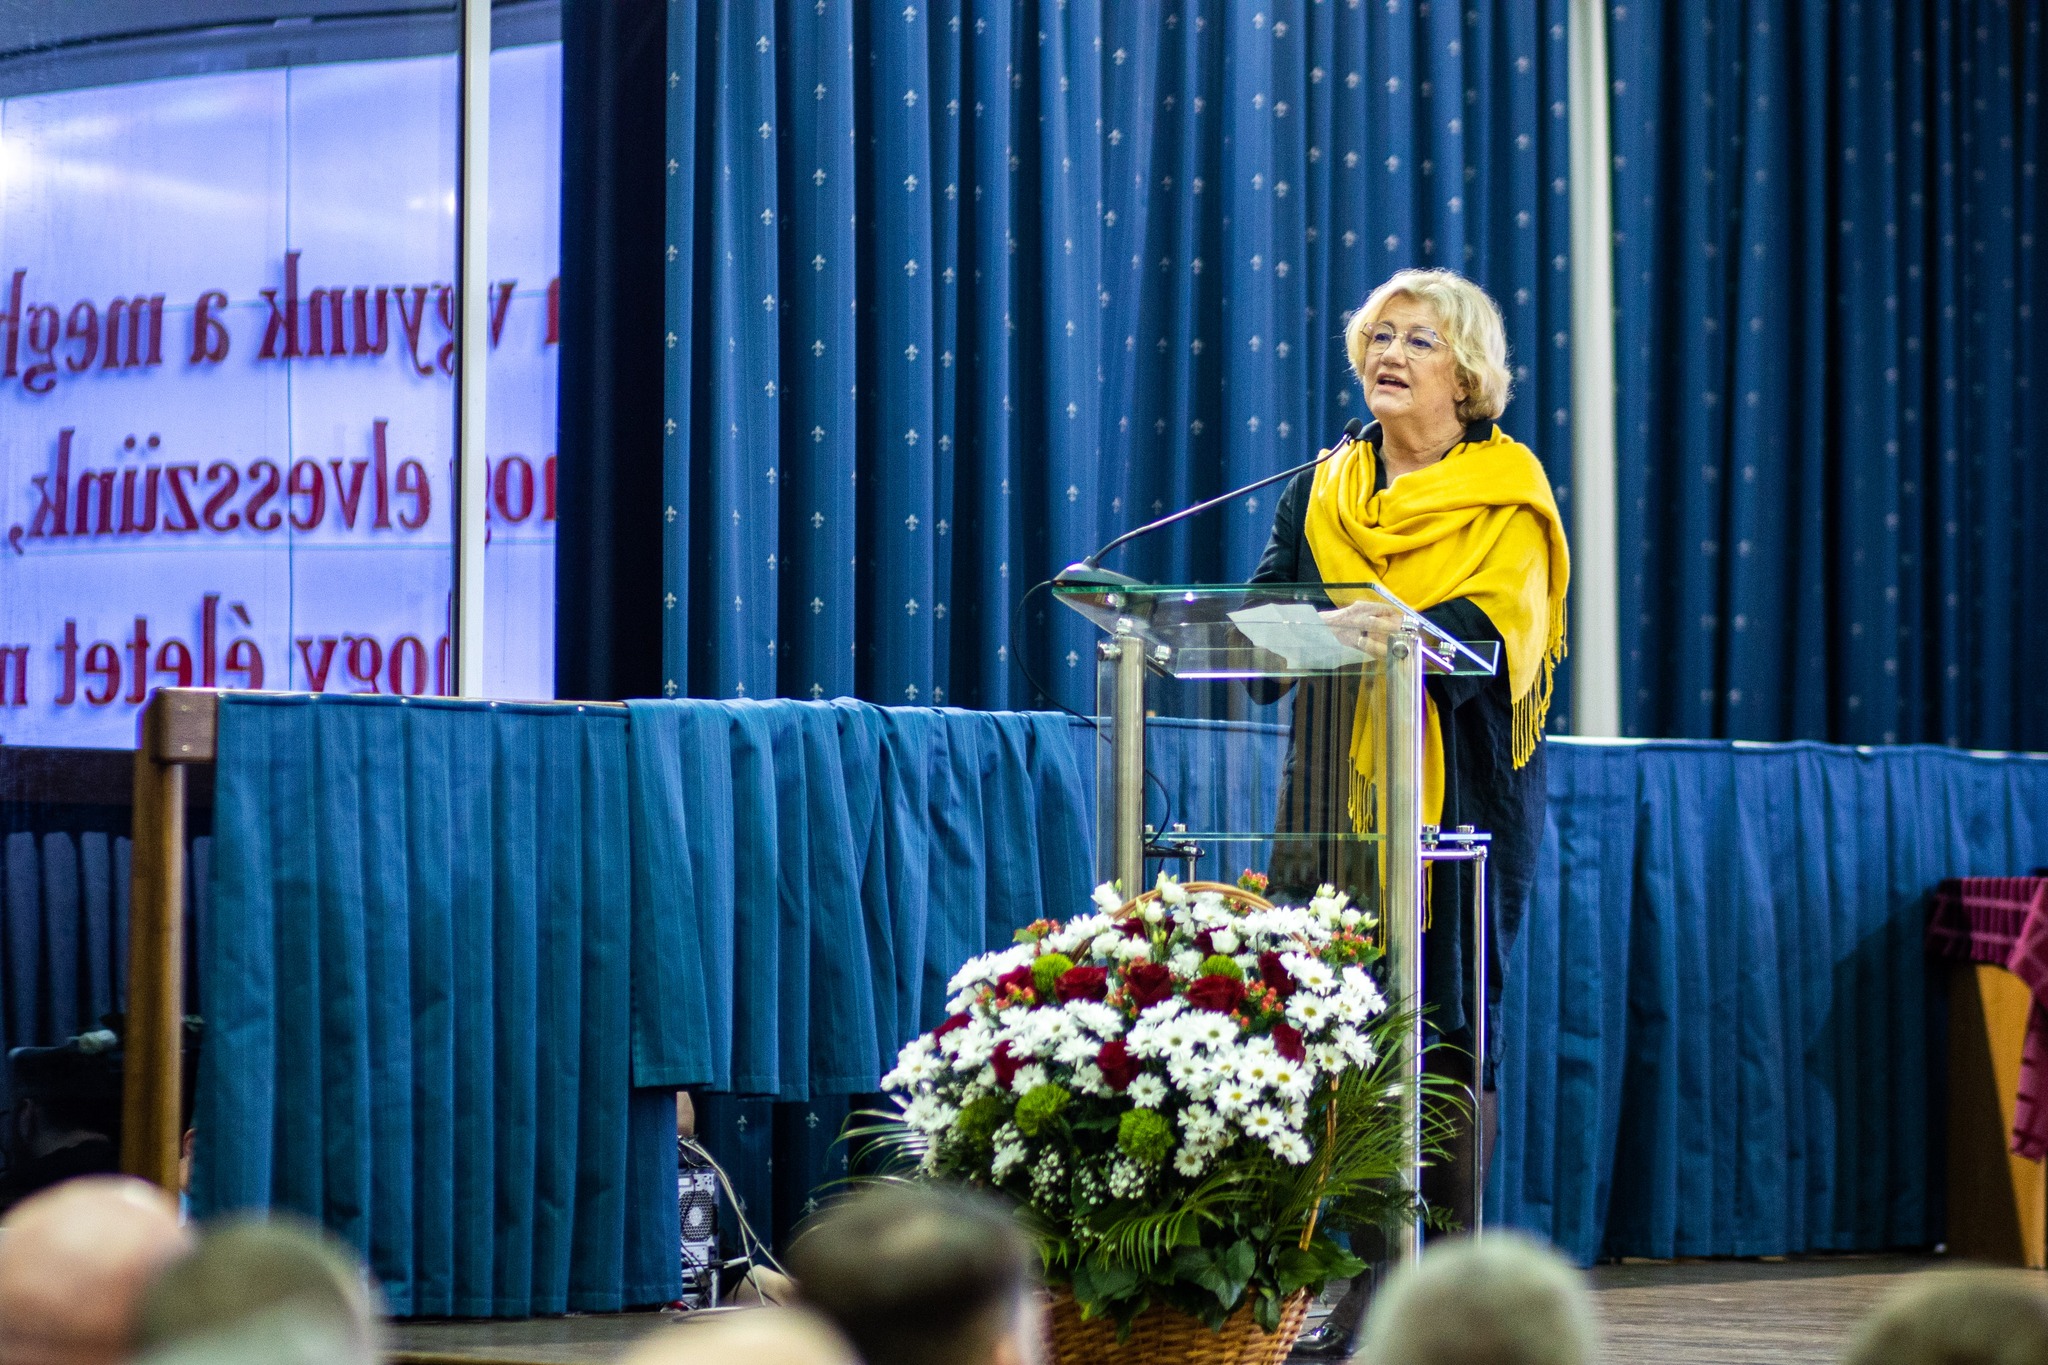 Katalin Szili Speaks about Upholding Minority Rights amid Conflict